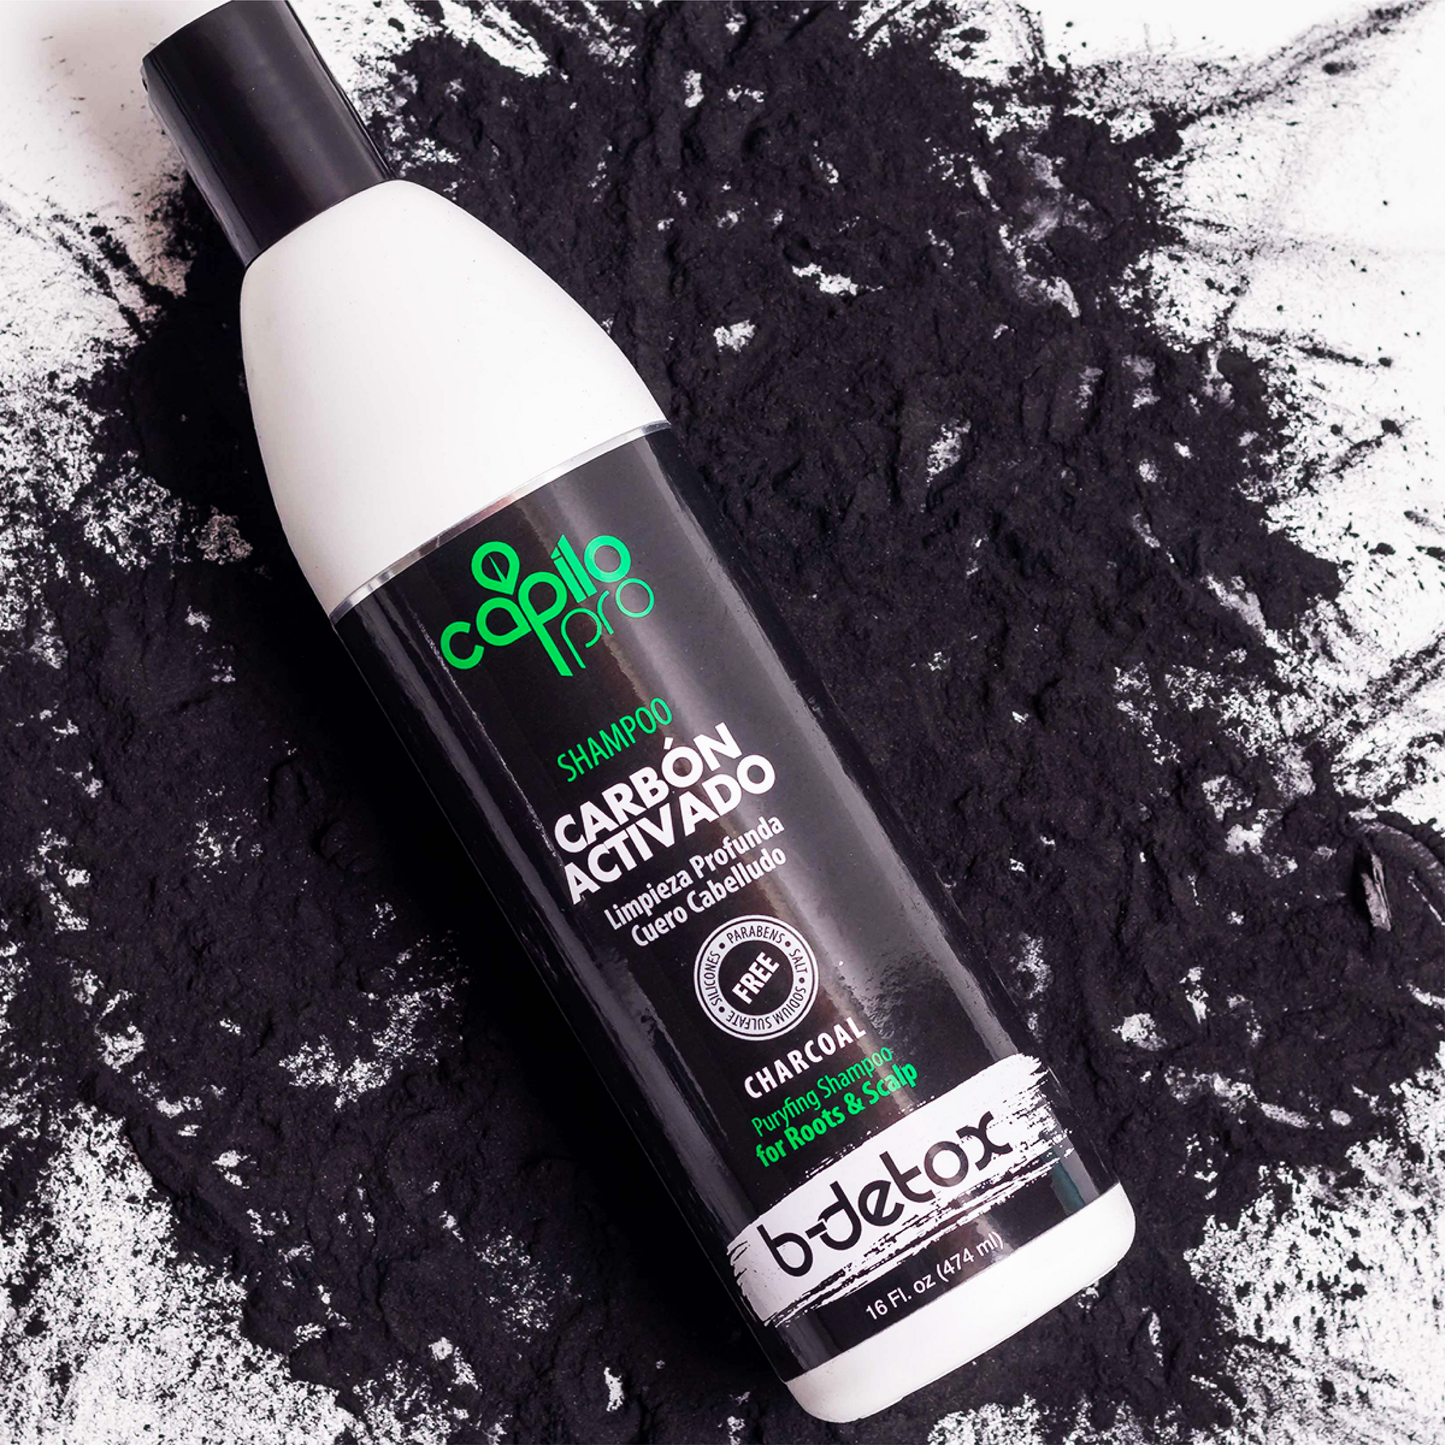 Capilo Pro B Detox Deep Cleansing Shampoo 16 oz. | Activated Charcoal and Peppermint